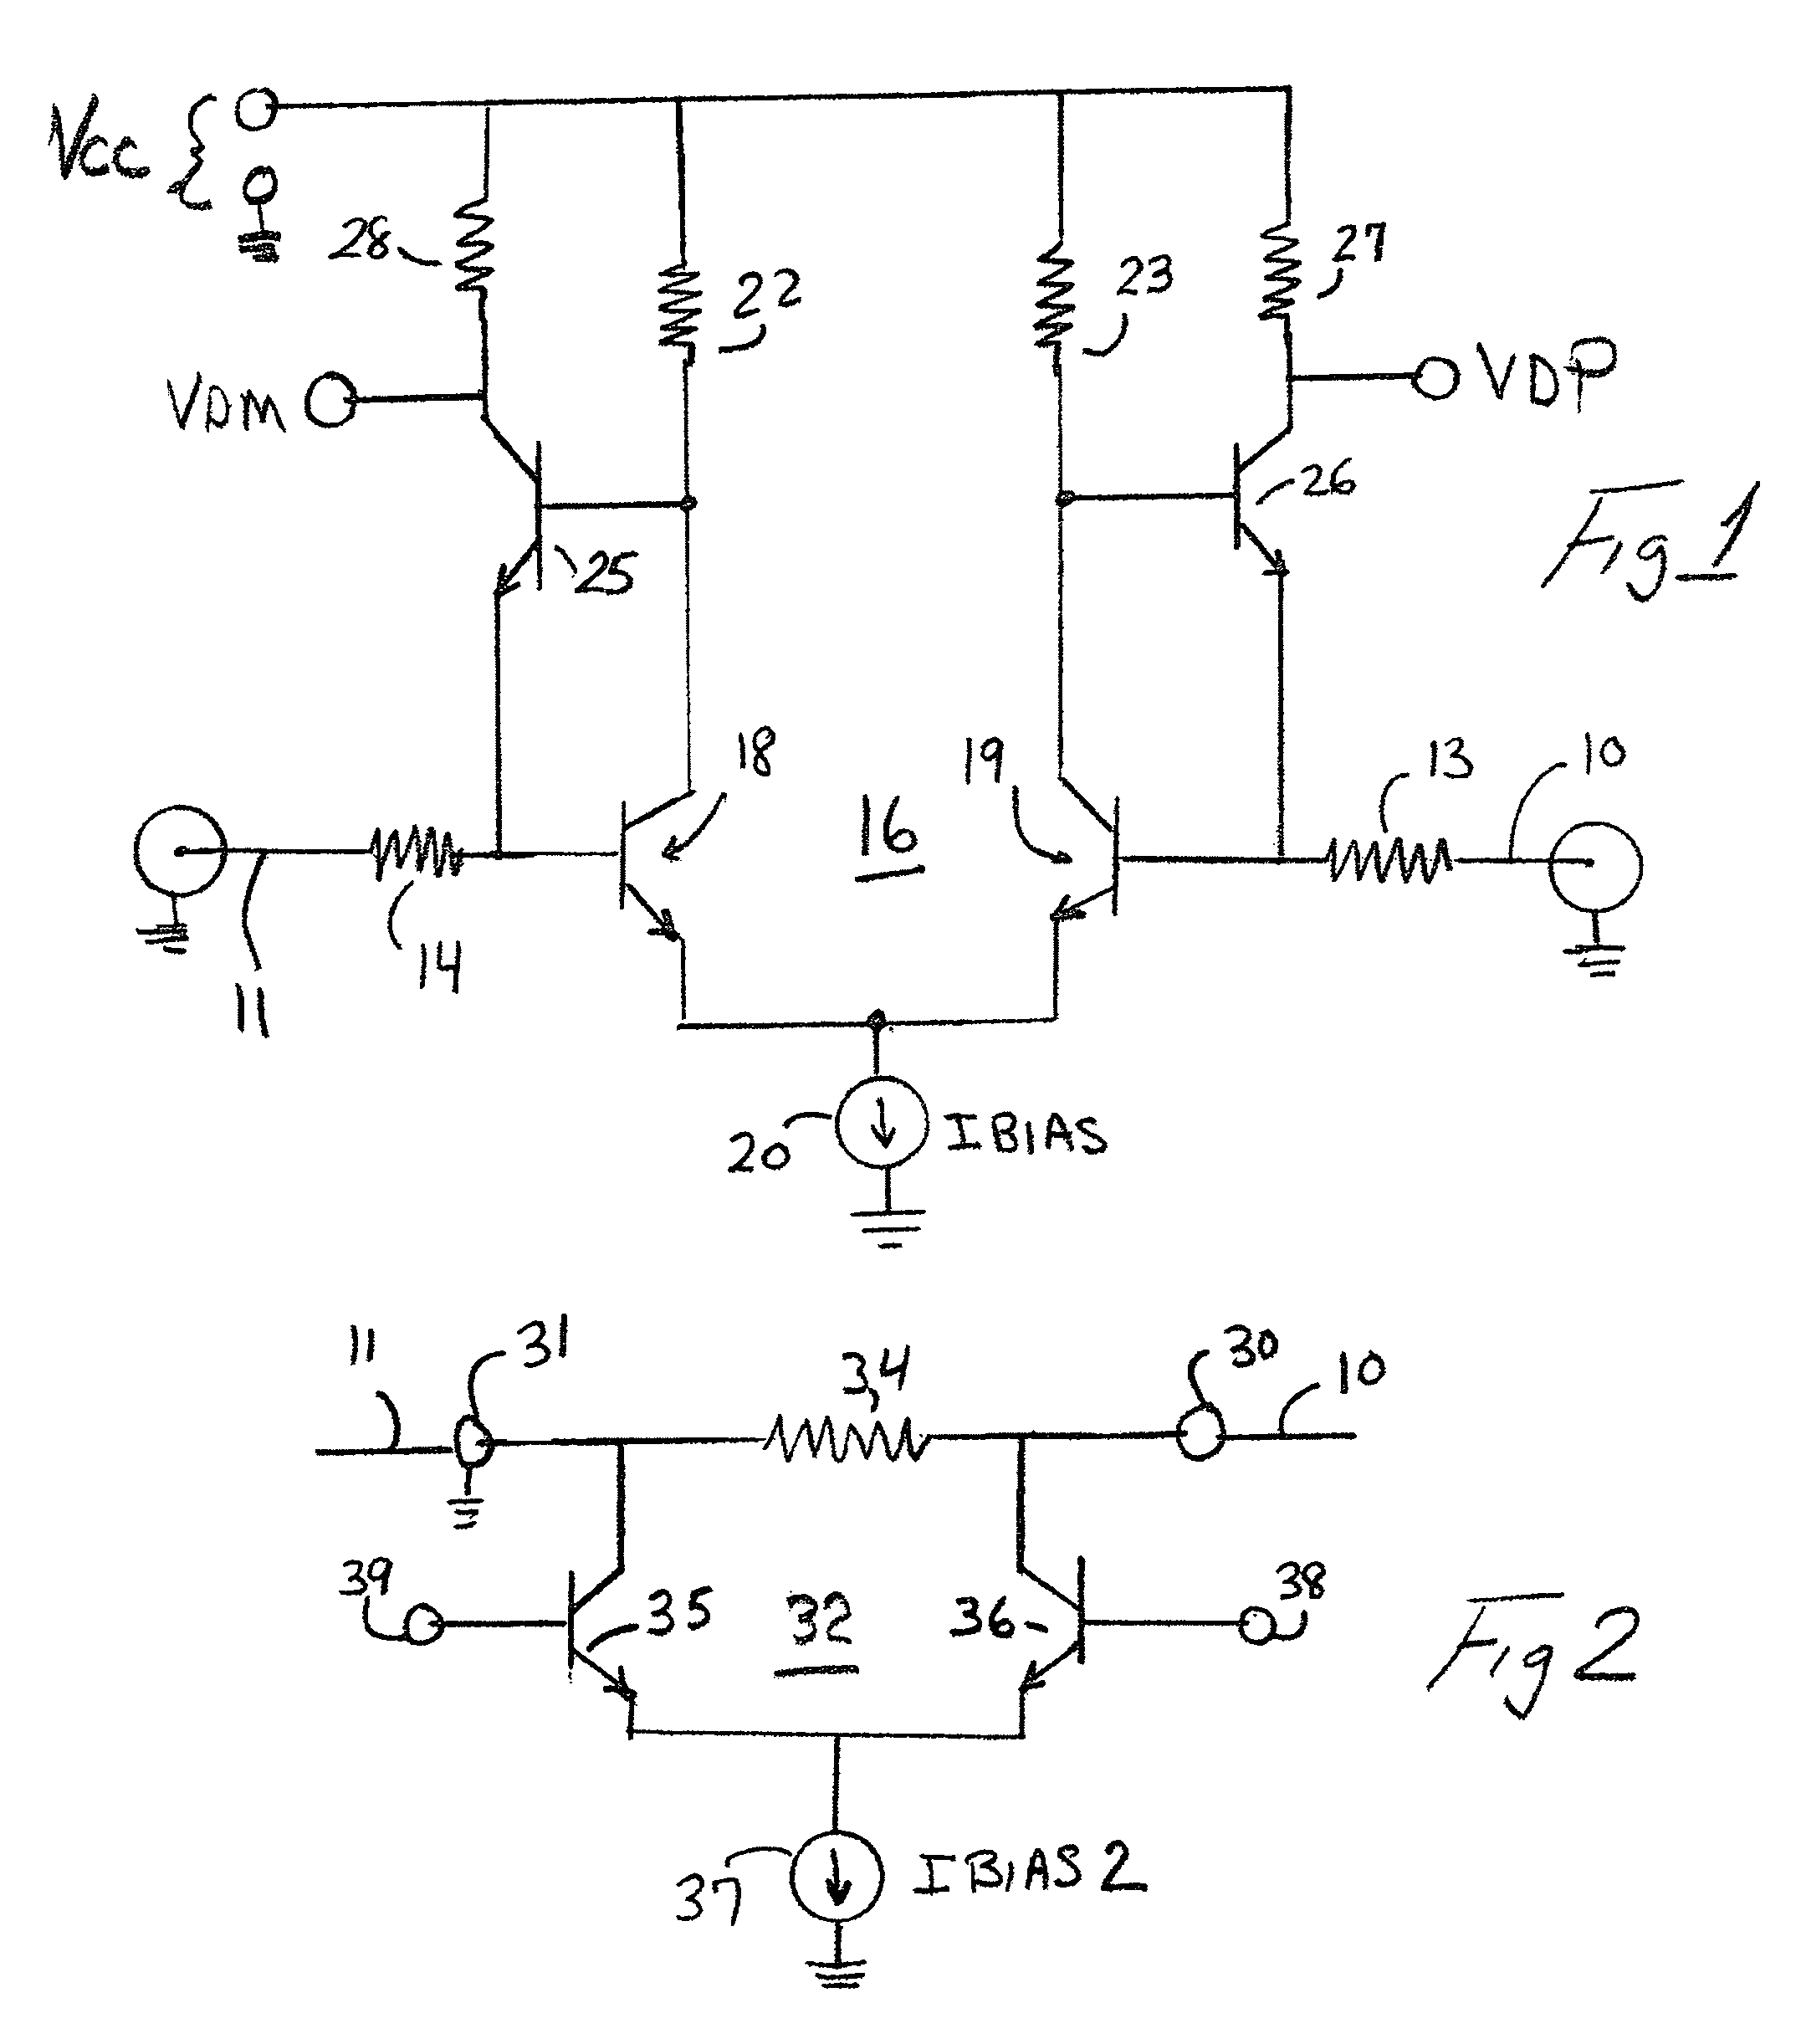 Apparatus and method for transmitting and receiving high-speed differential current data between circuit devices